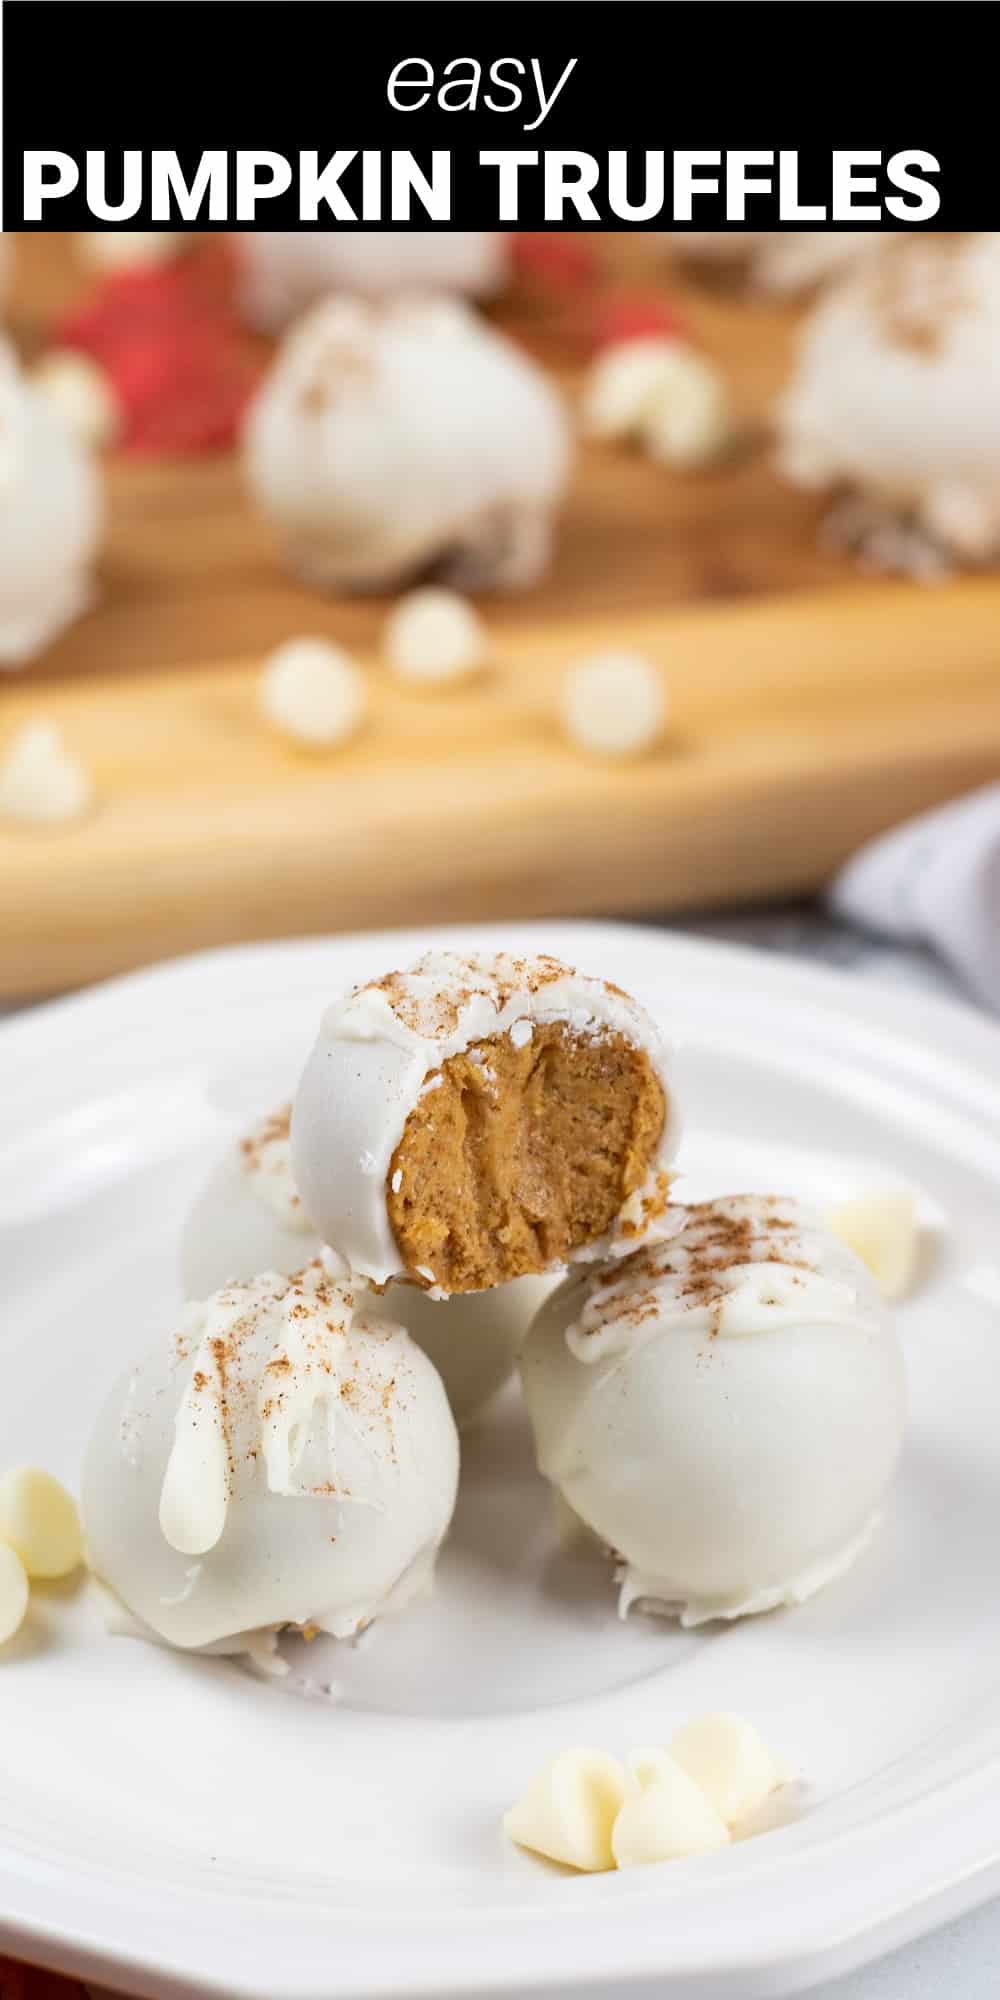 These pumpkin truffles are a rich and decadent dessert that’s perfect for the holiday season. They feature a creamy and sweet pumpkin cream cheese filling infused with pumpkin pie spice, covered in a smooth white chocolate coating, and decorated with your choice of festive and fun decorations. 